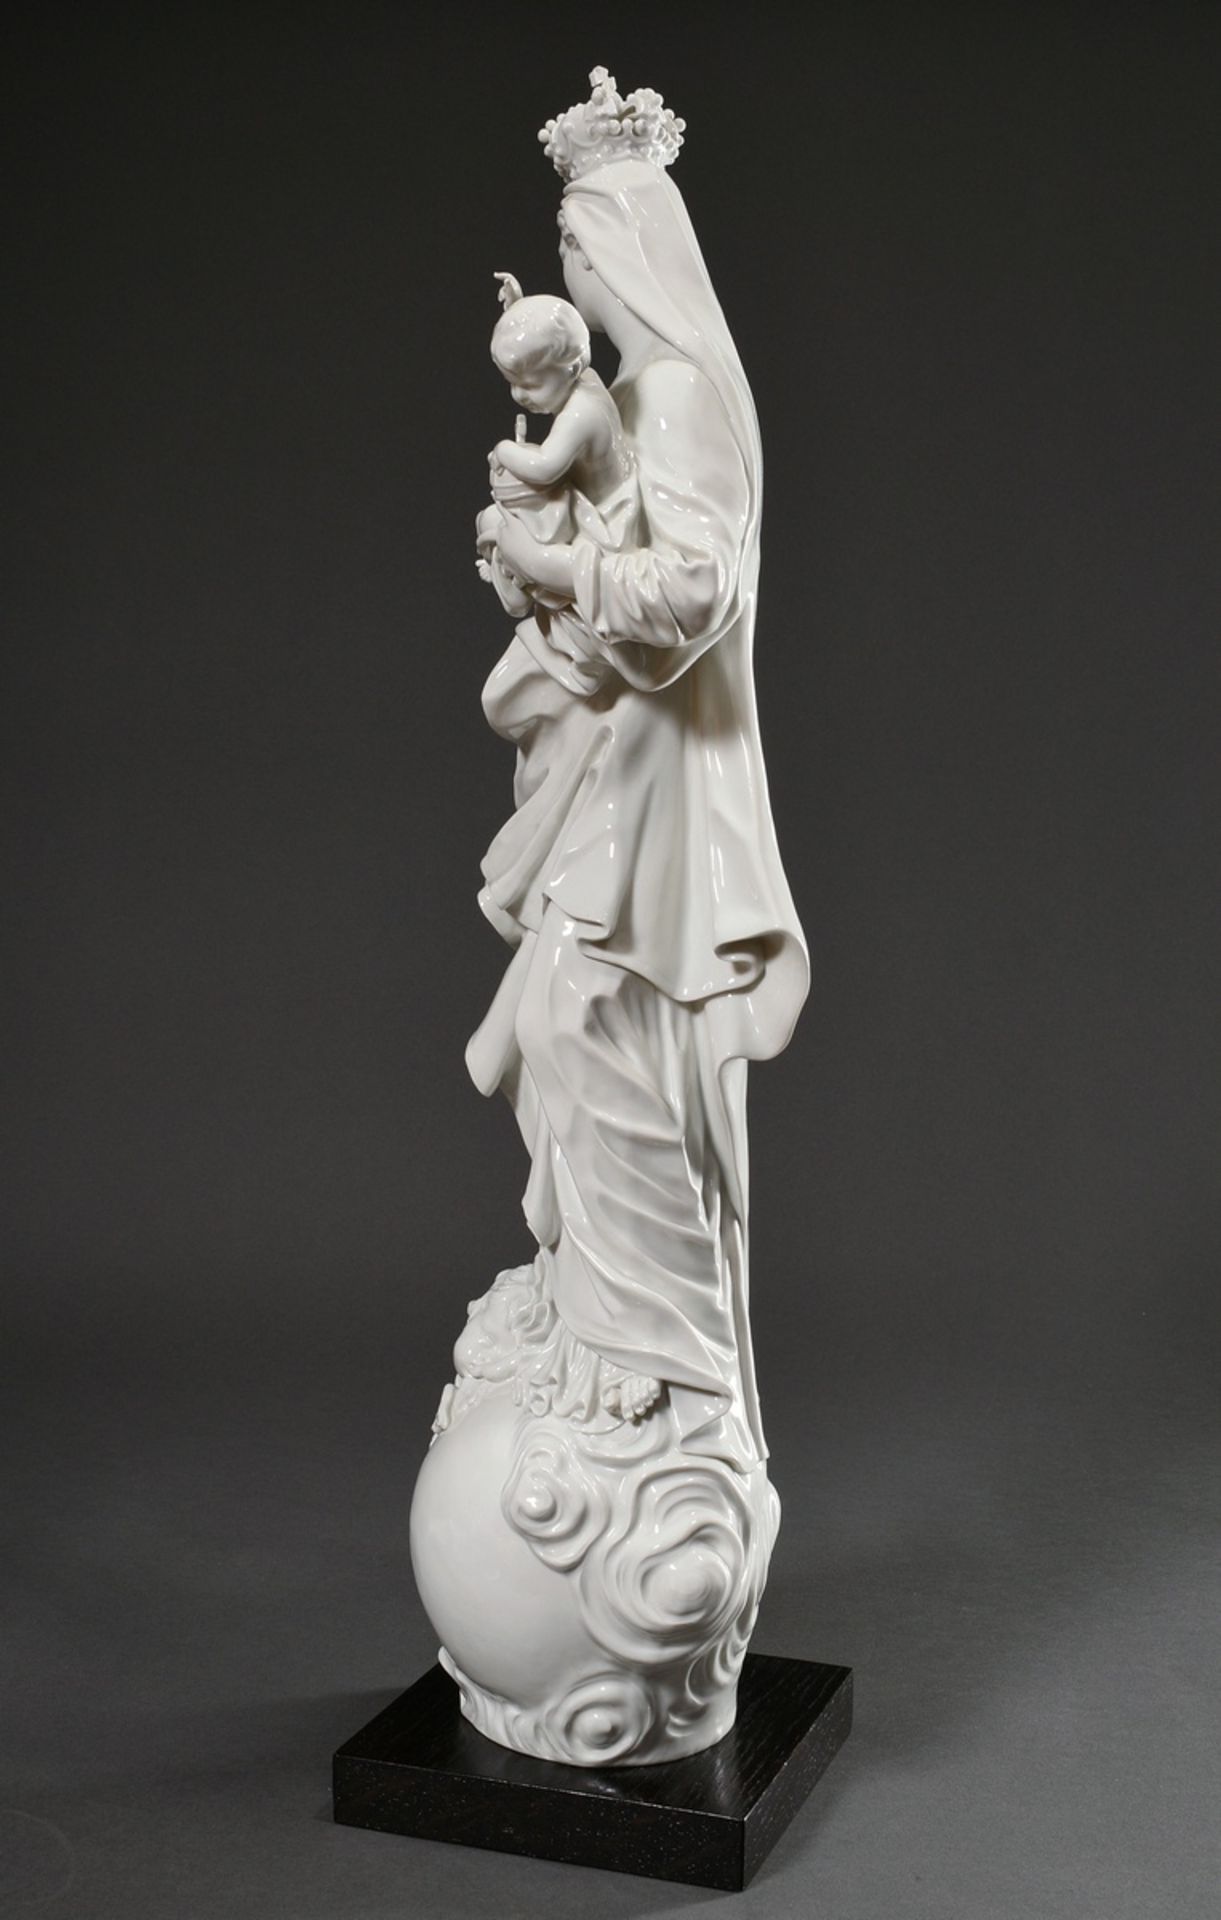 Large Meissen white porcelain figure "Madonna with the Child on the Globe", designed by Johann Gott - Image 10 of 11